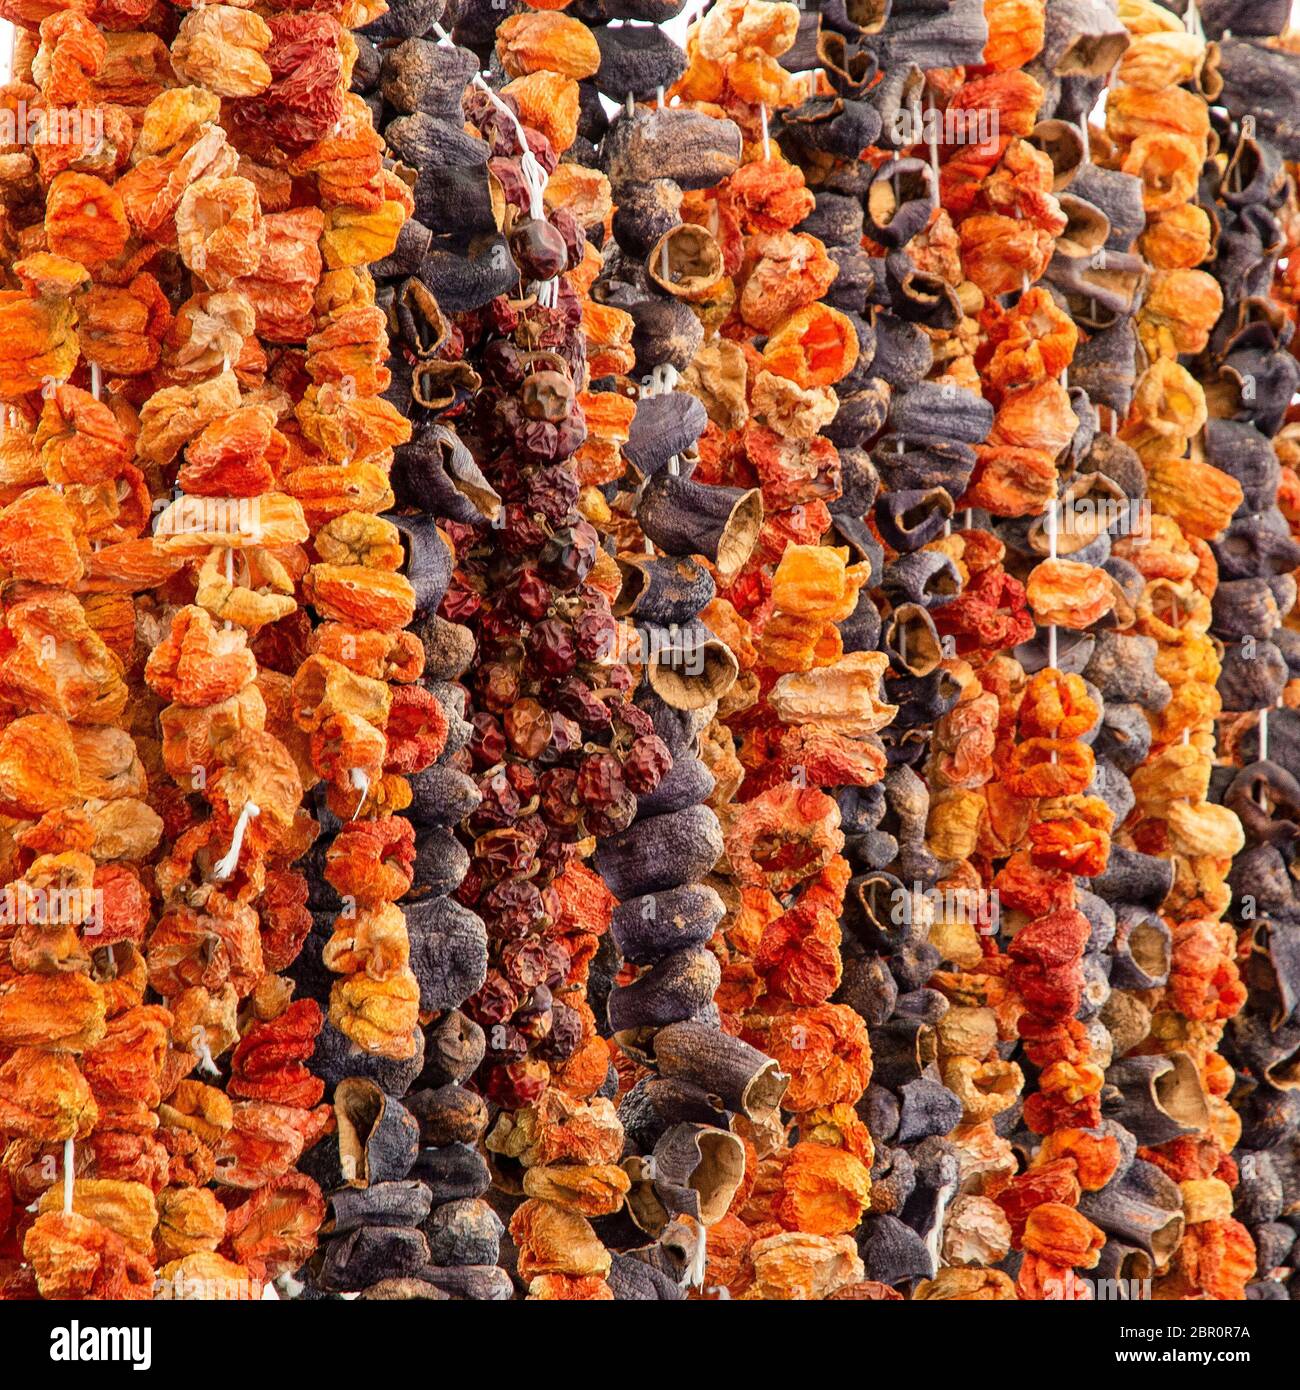 Eastern spices sun dried paprika peppers pods and eggplants fruits hanging at Turkish grocery market Stock Photo